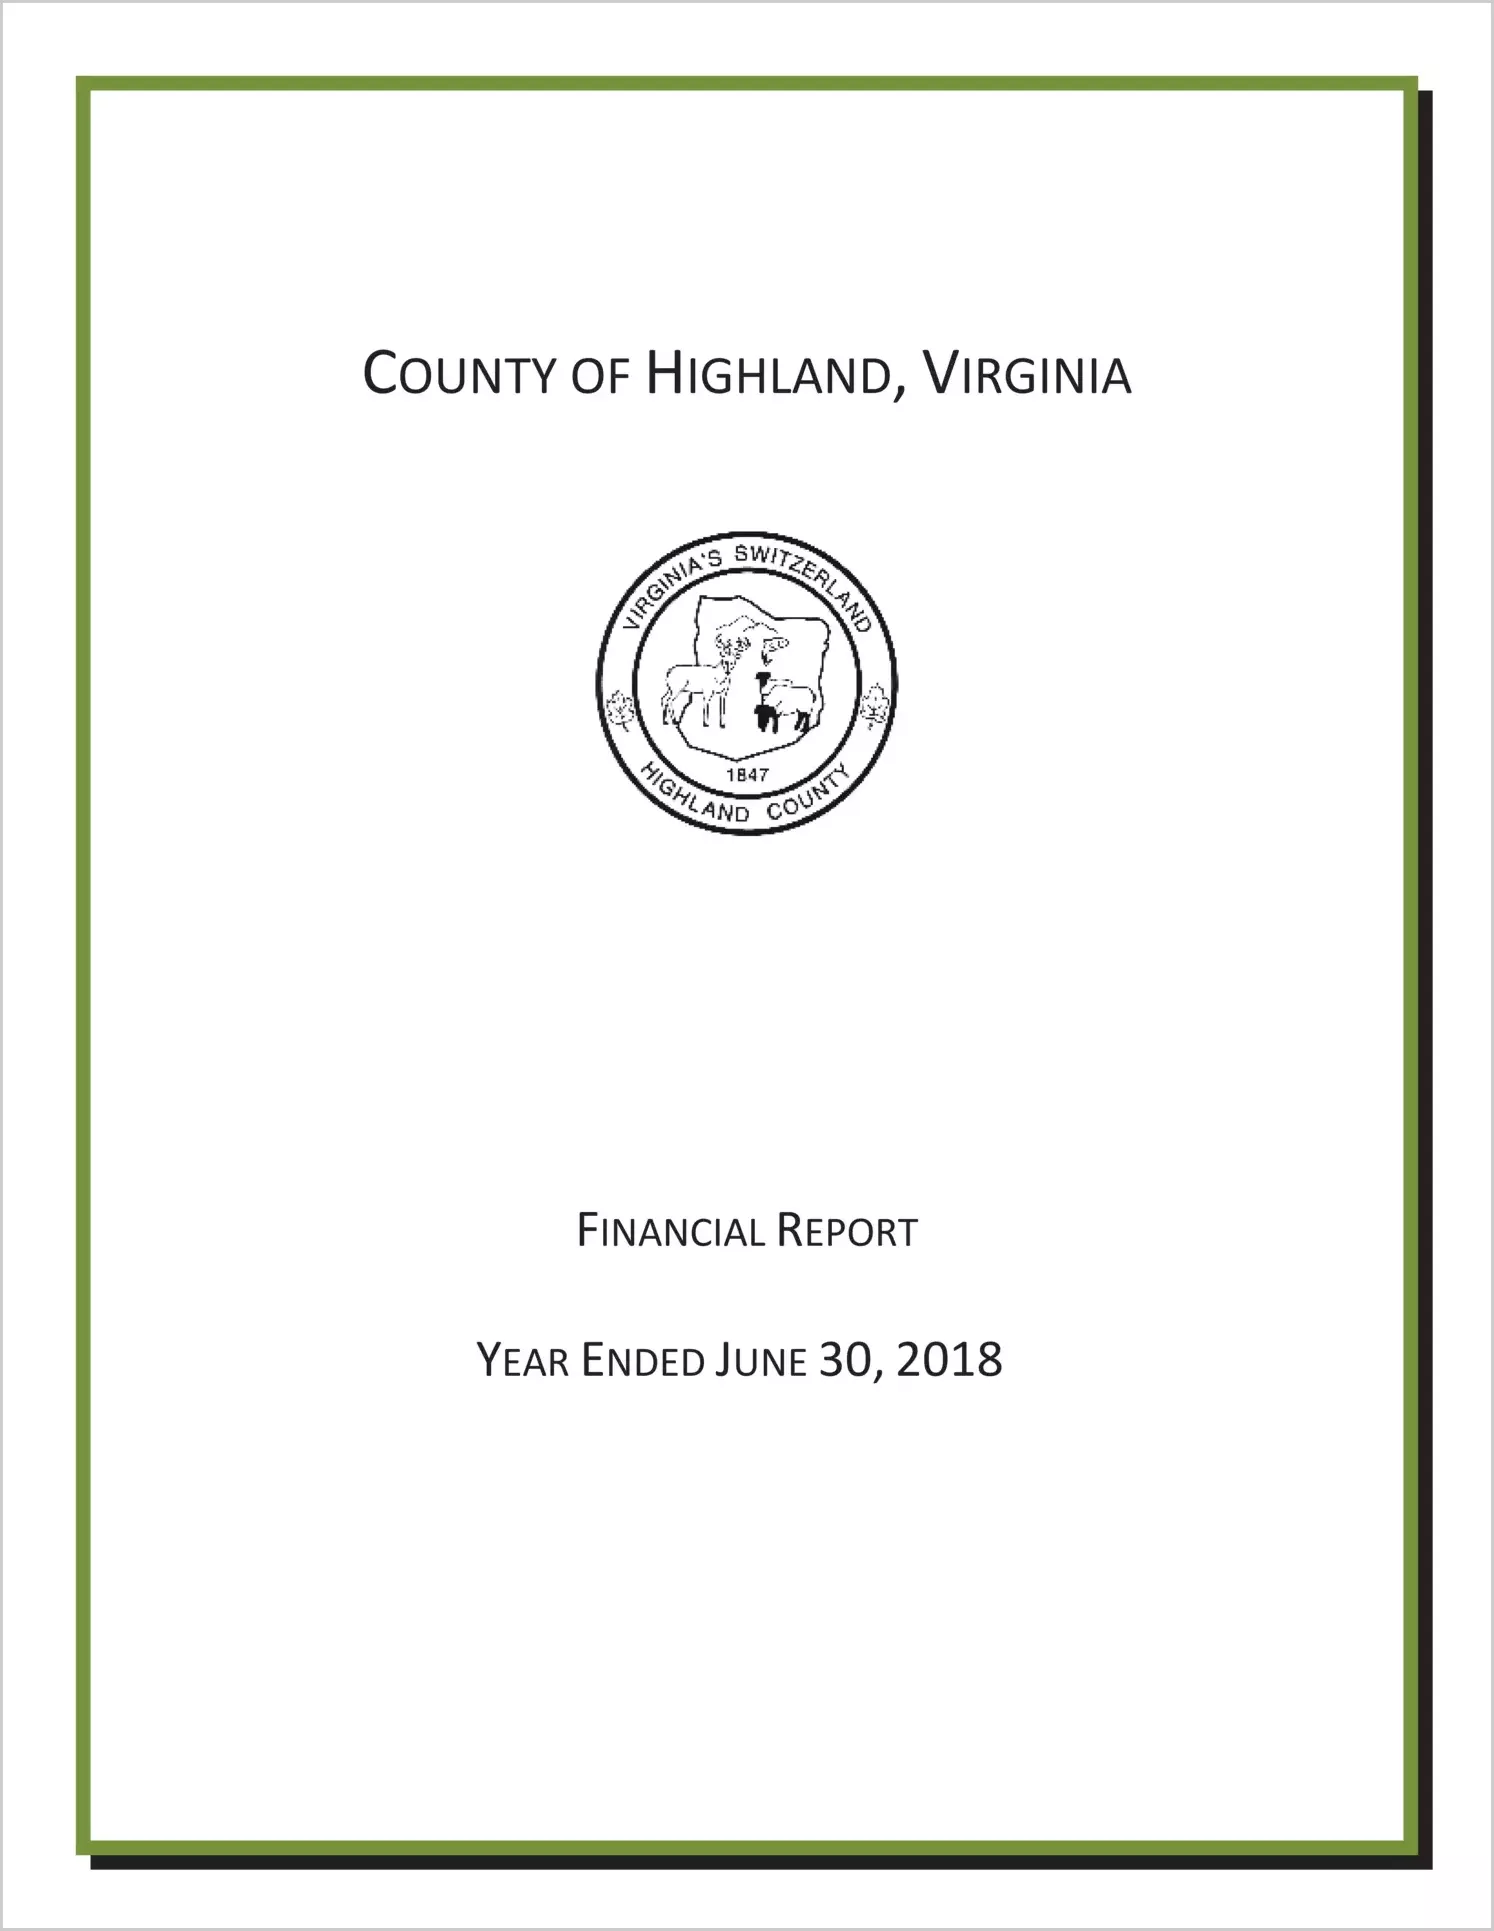 2018 Annual Financial Report for County of Highland